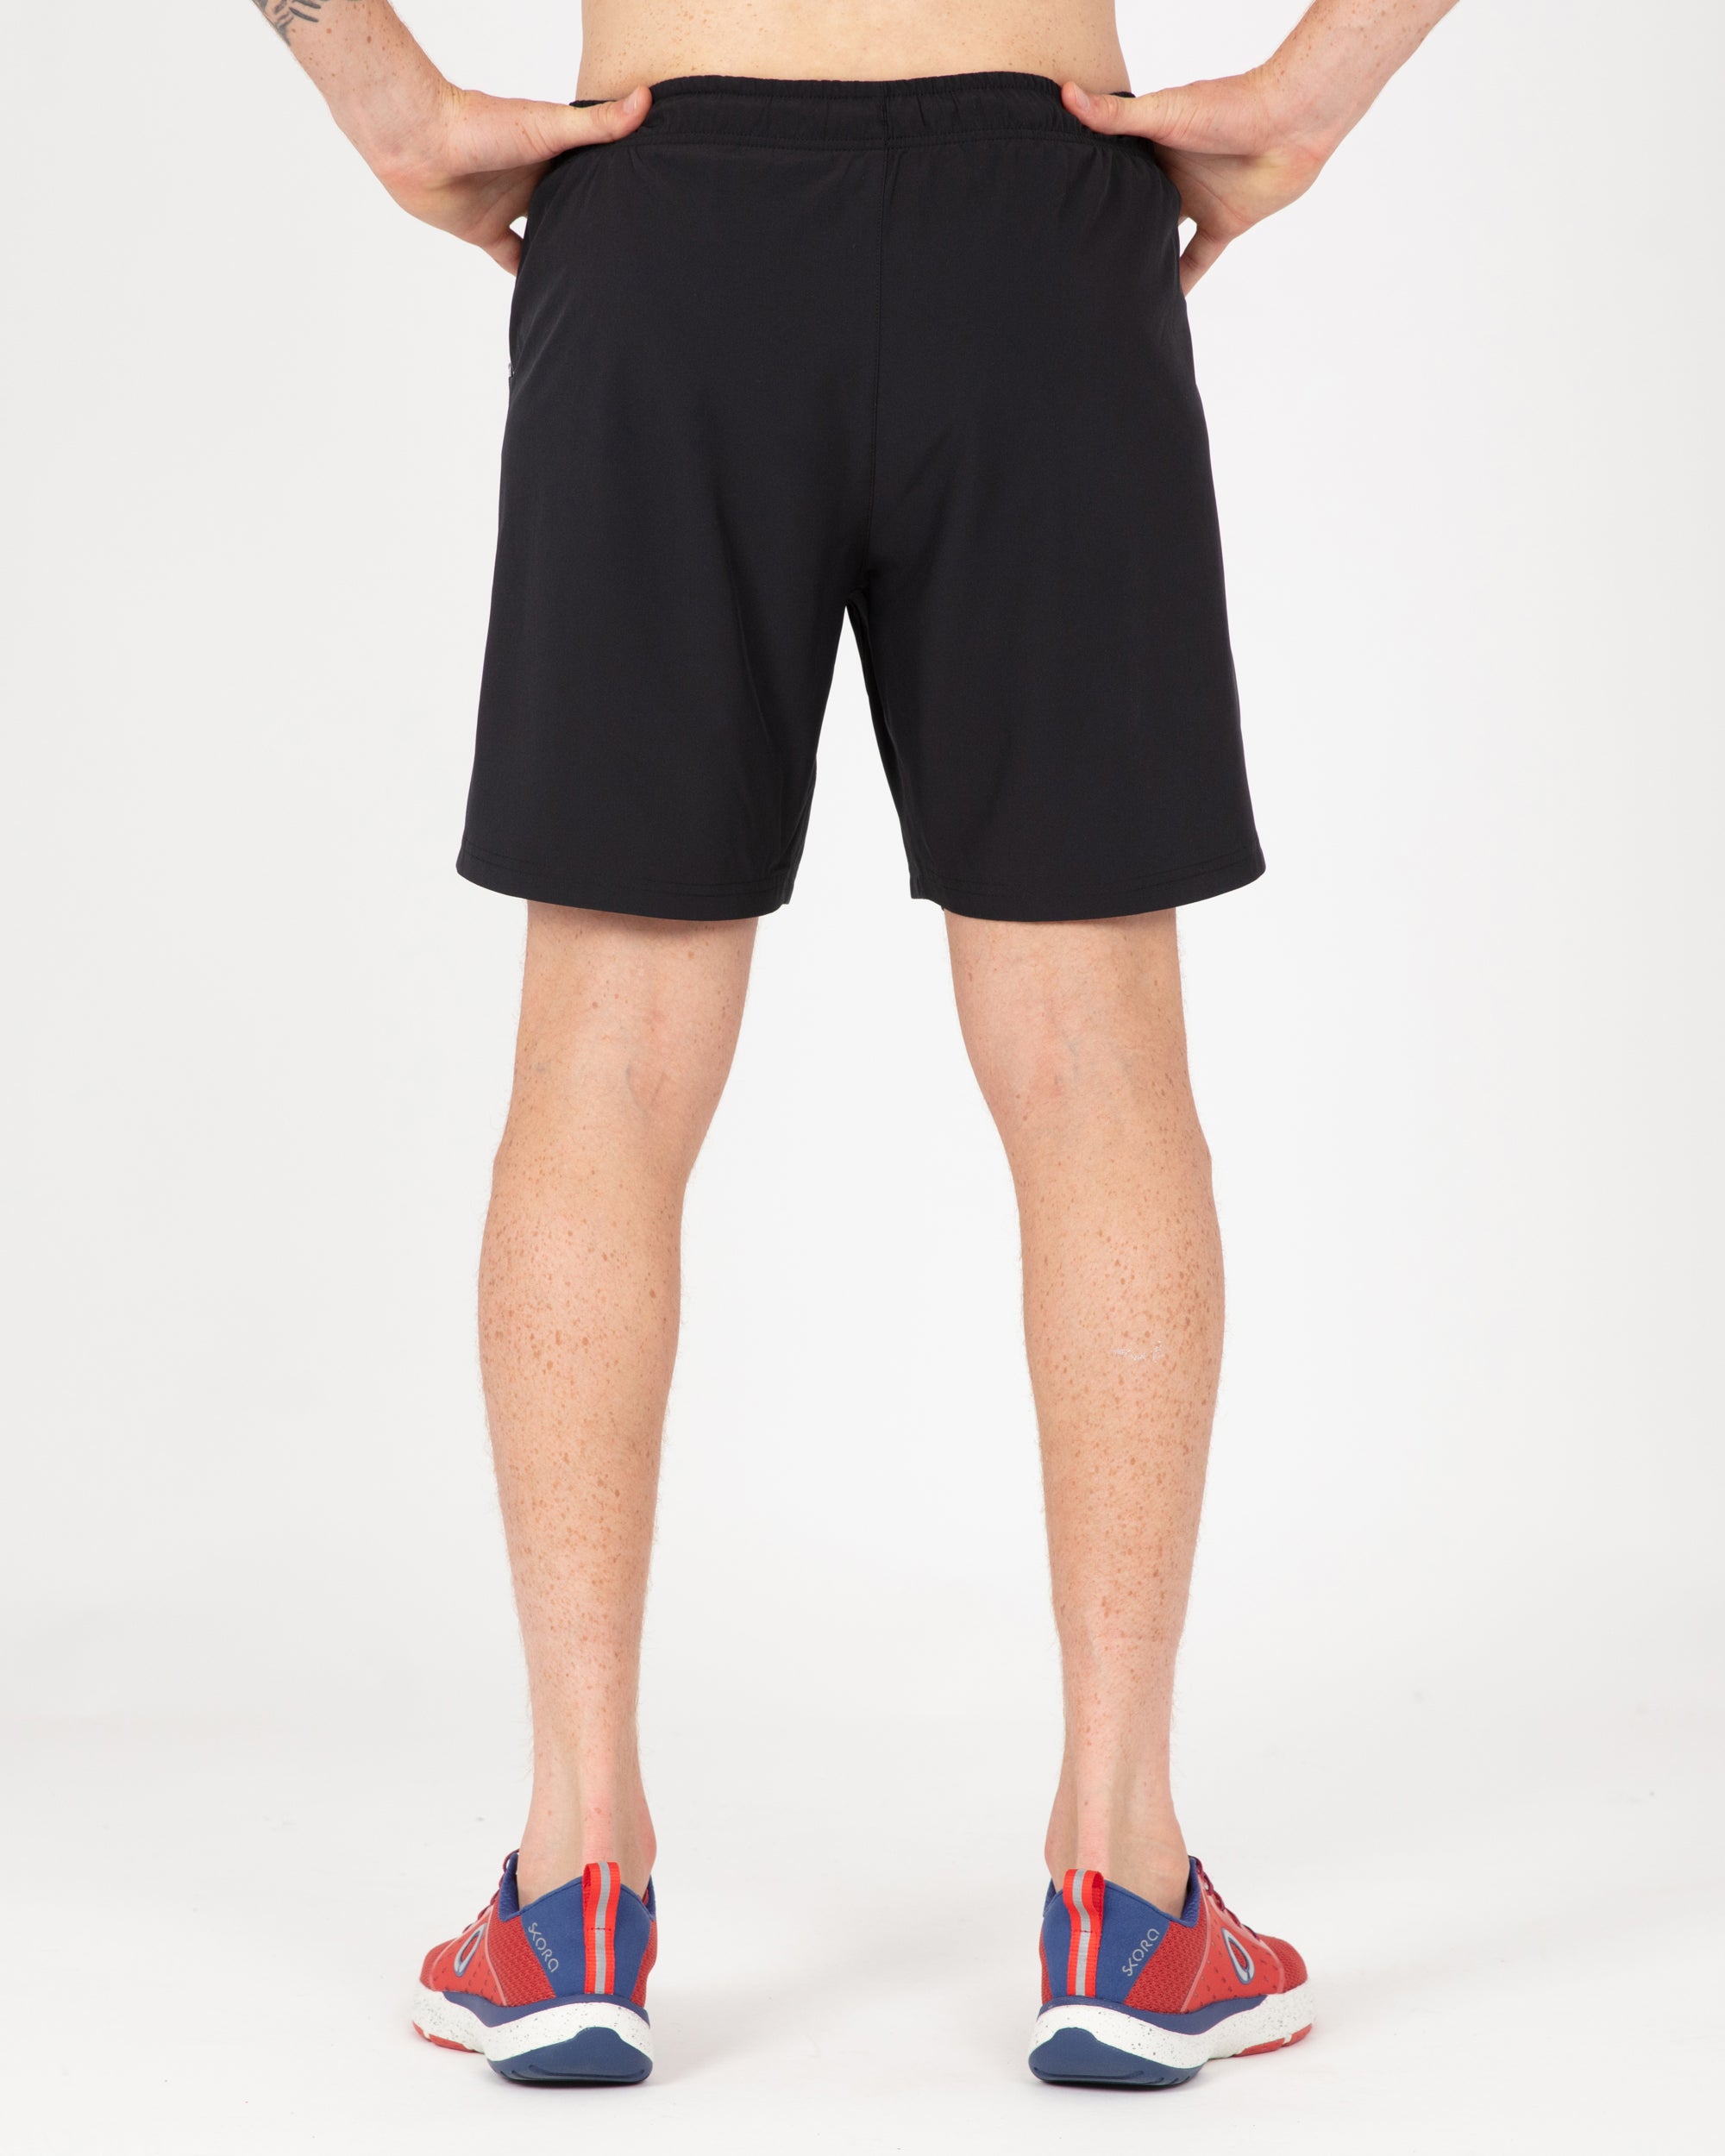 Men's Woven Stretch Alpha Base Running Shorts with Pockets – Layer 8